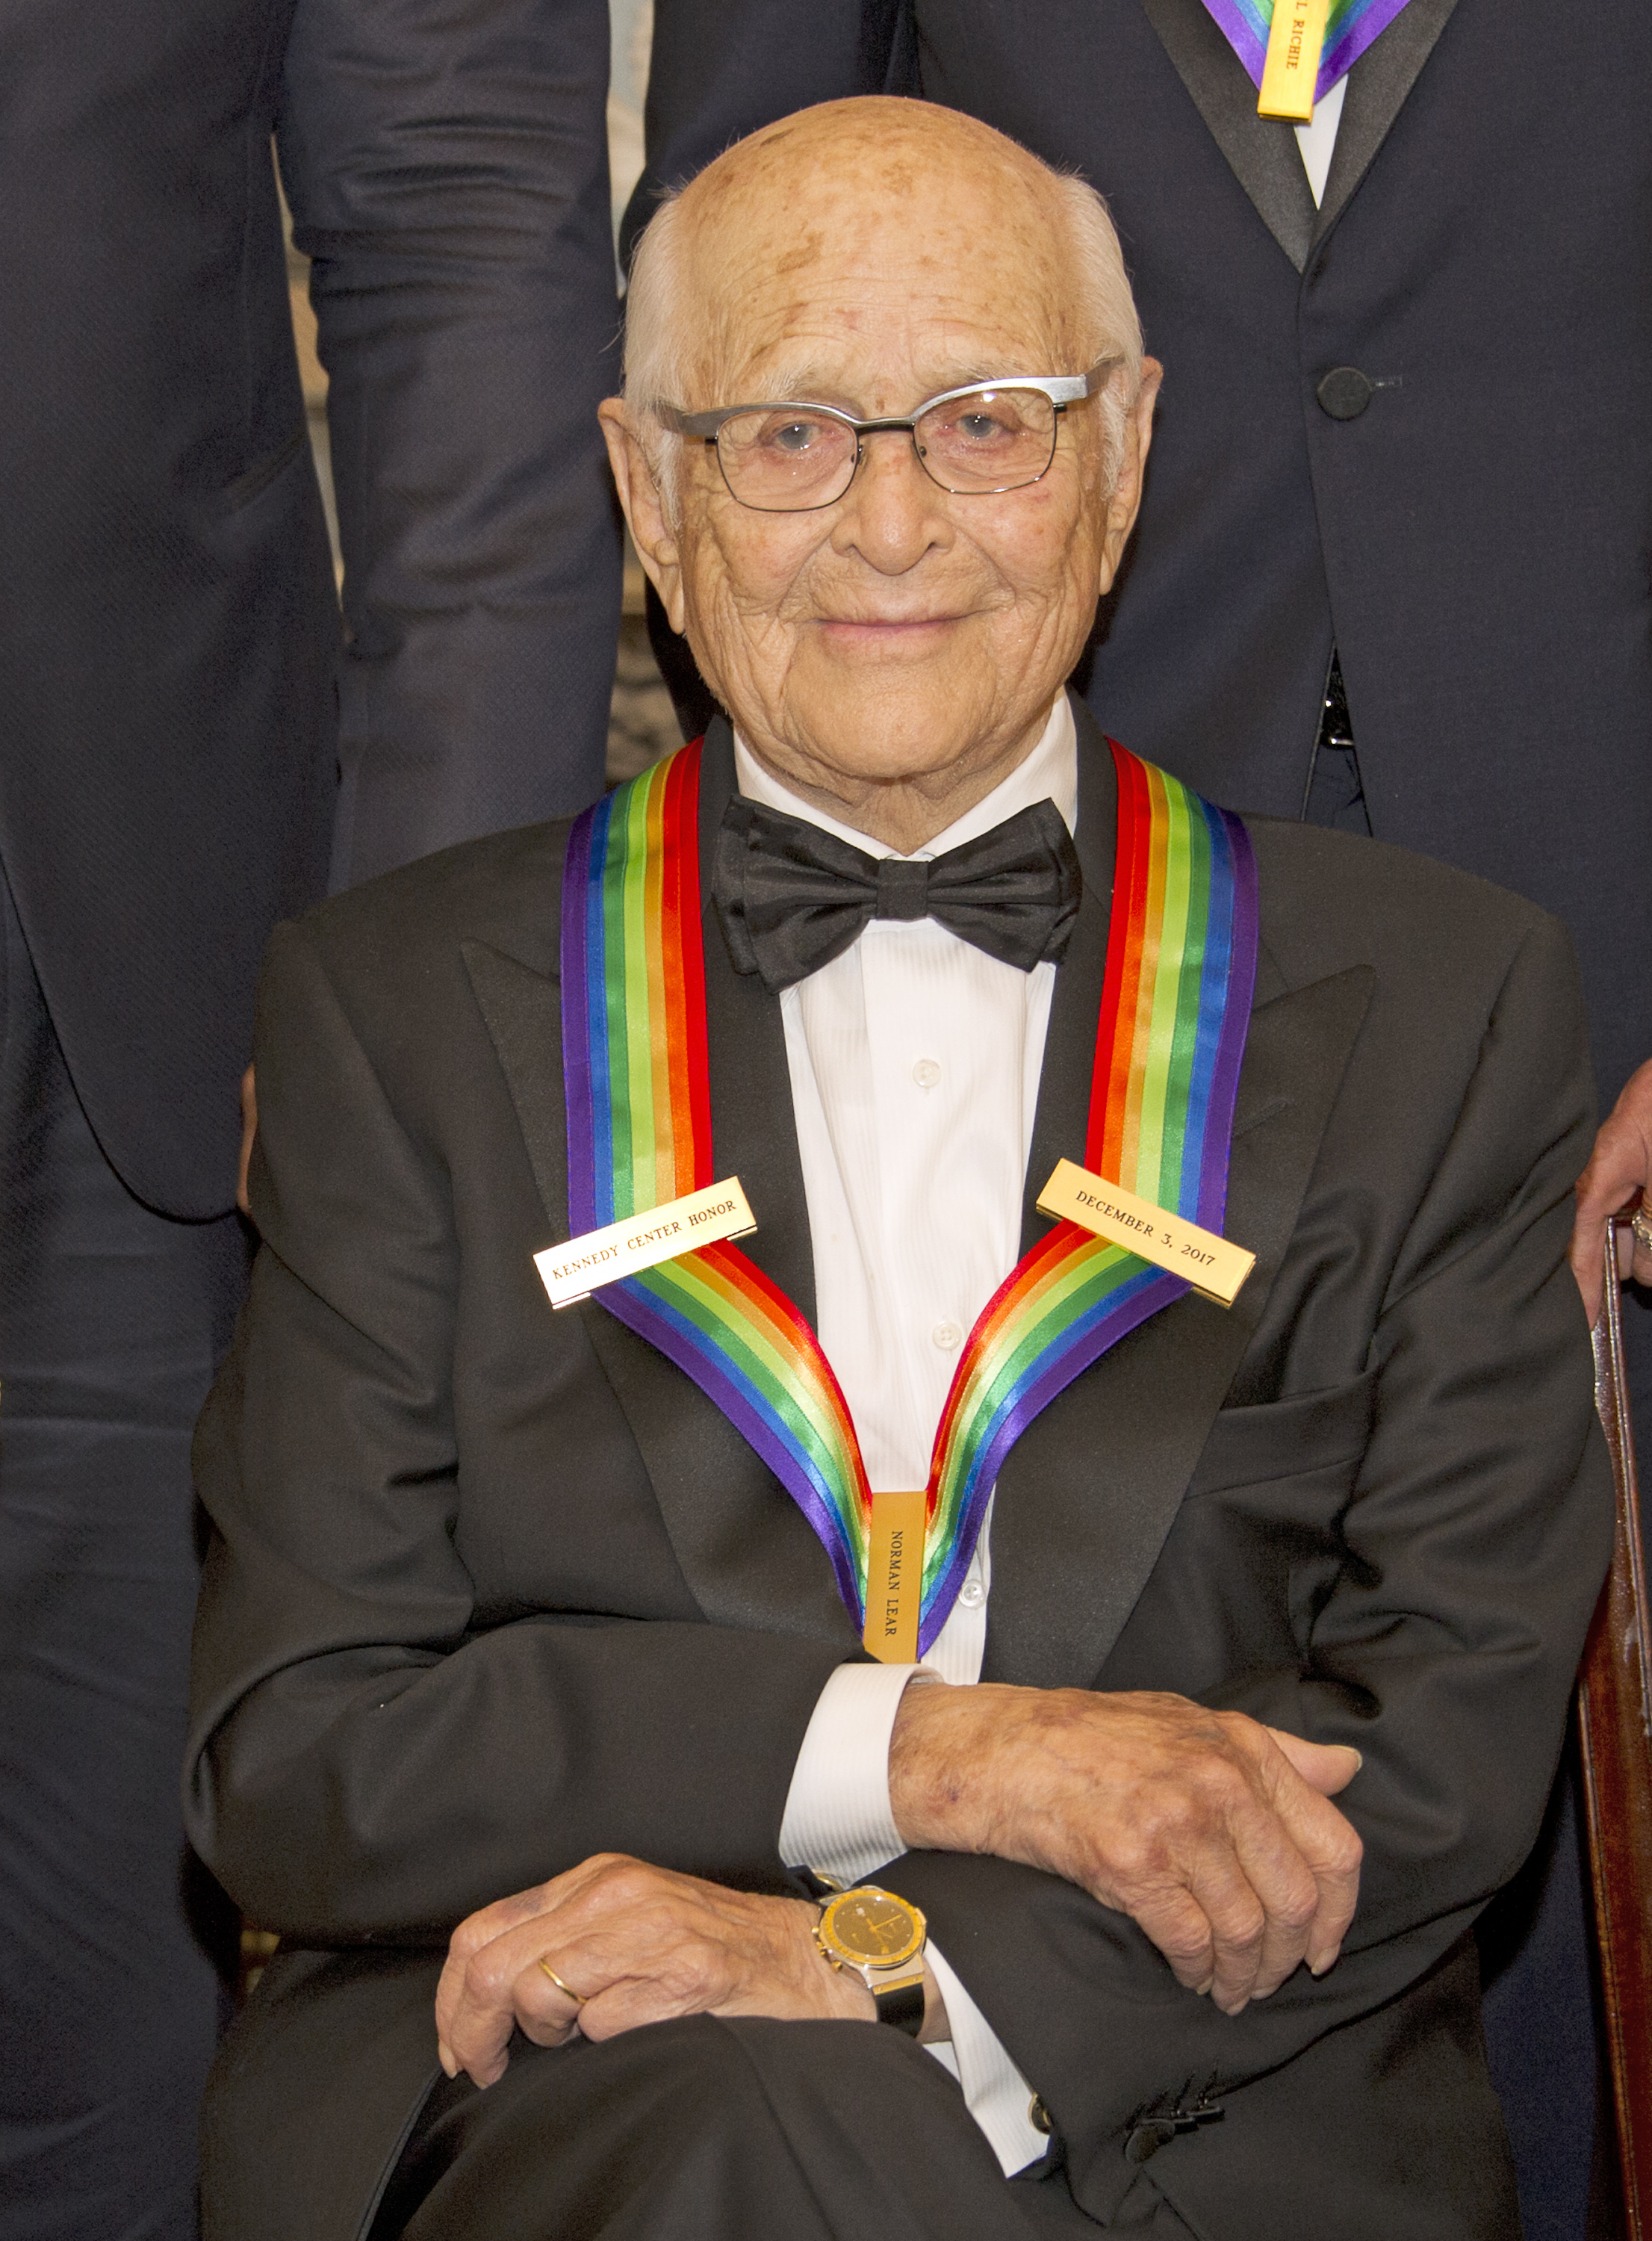 Norman Lear being honored